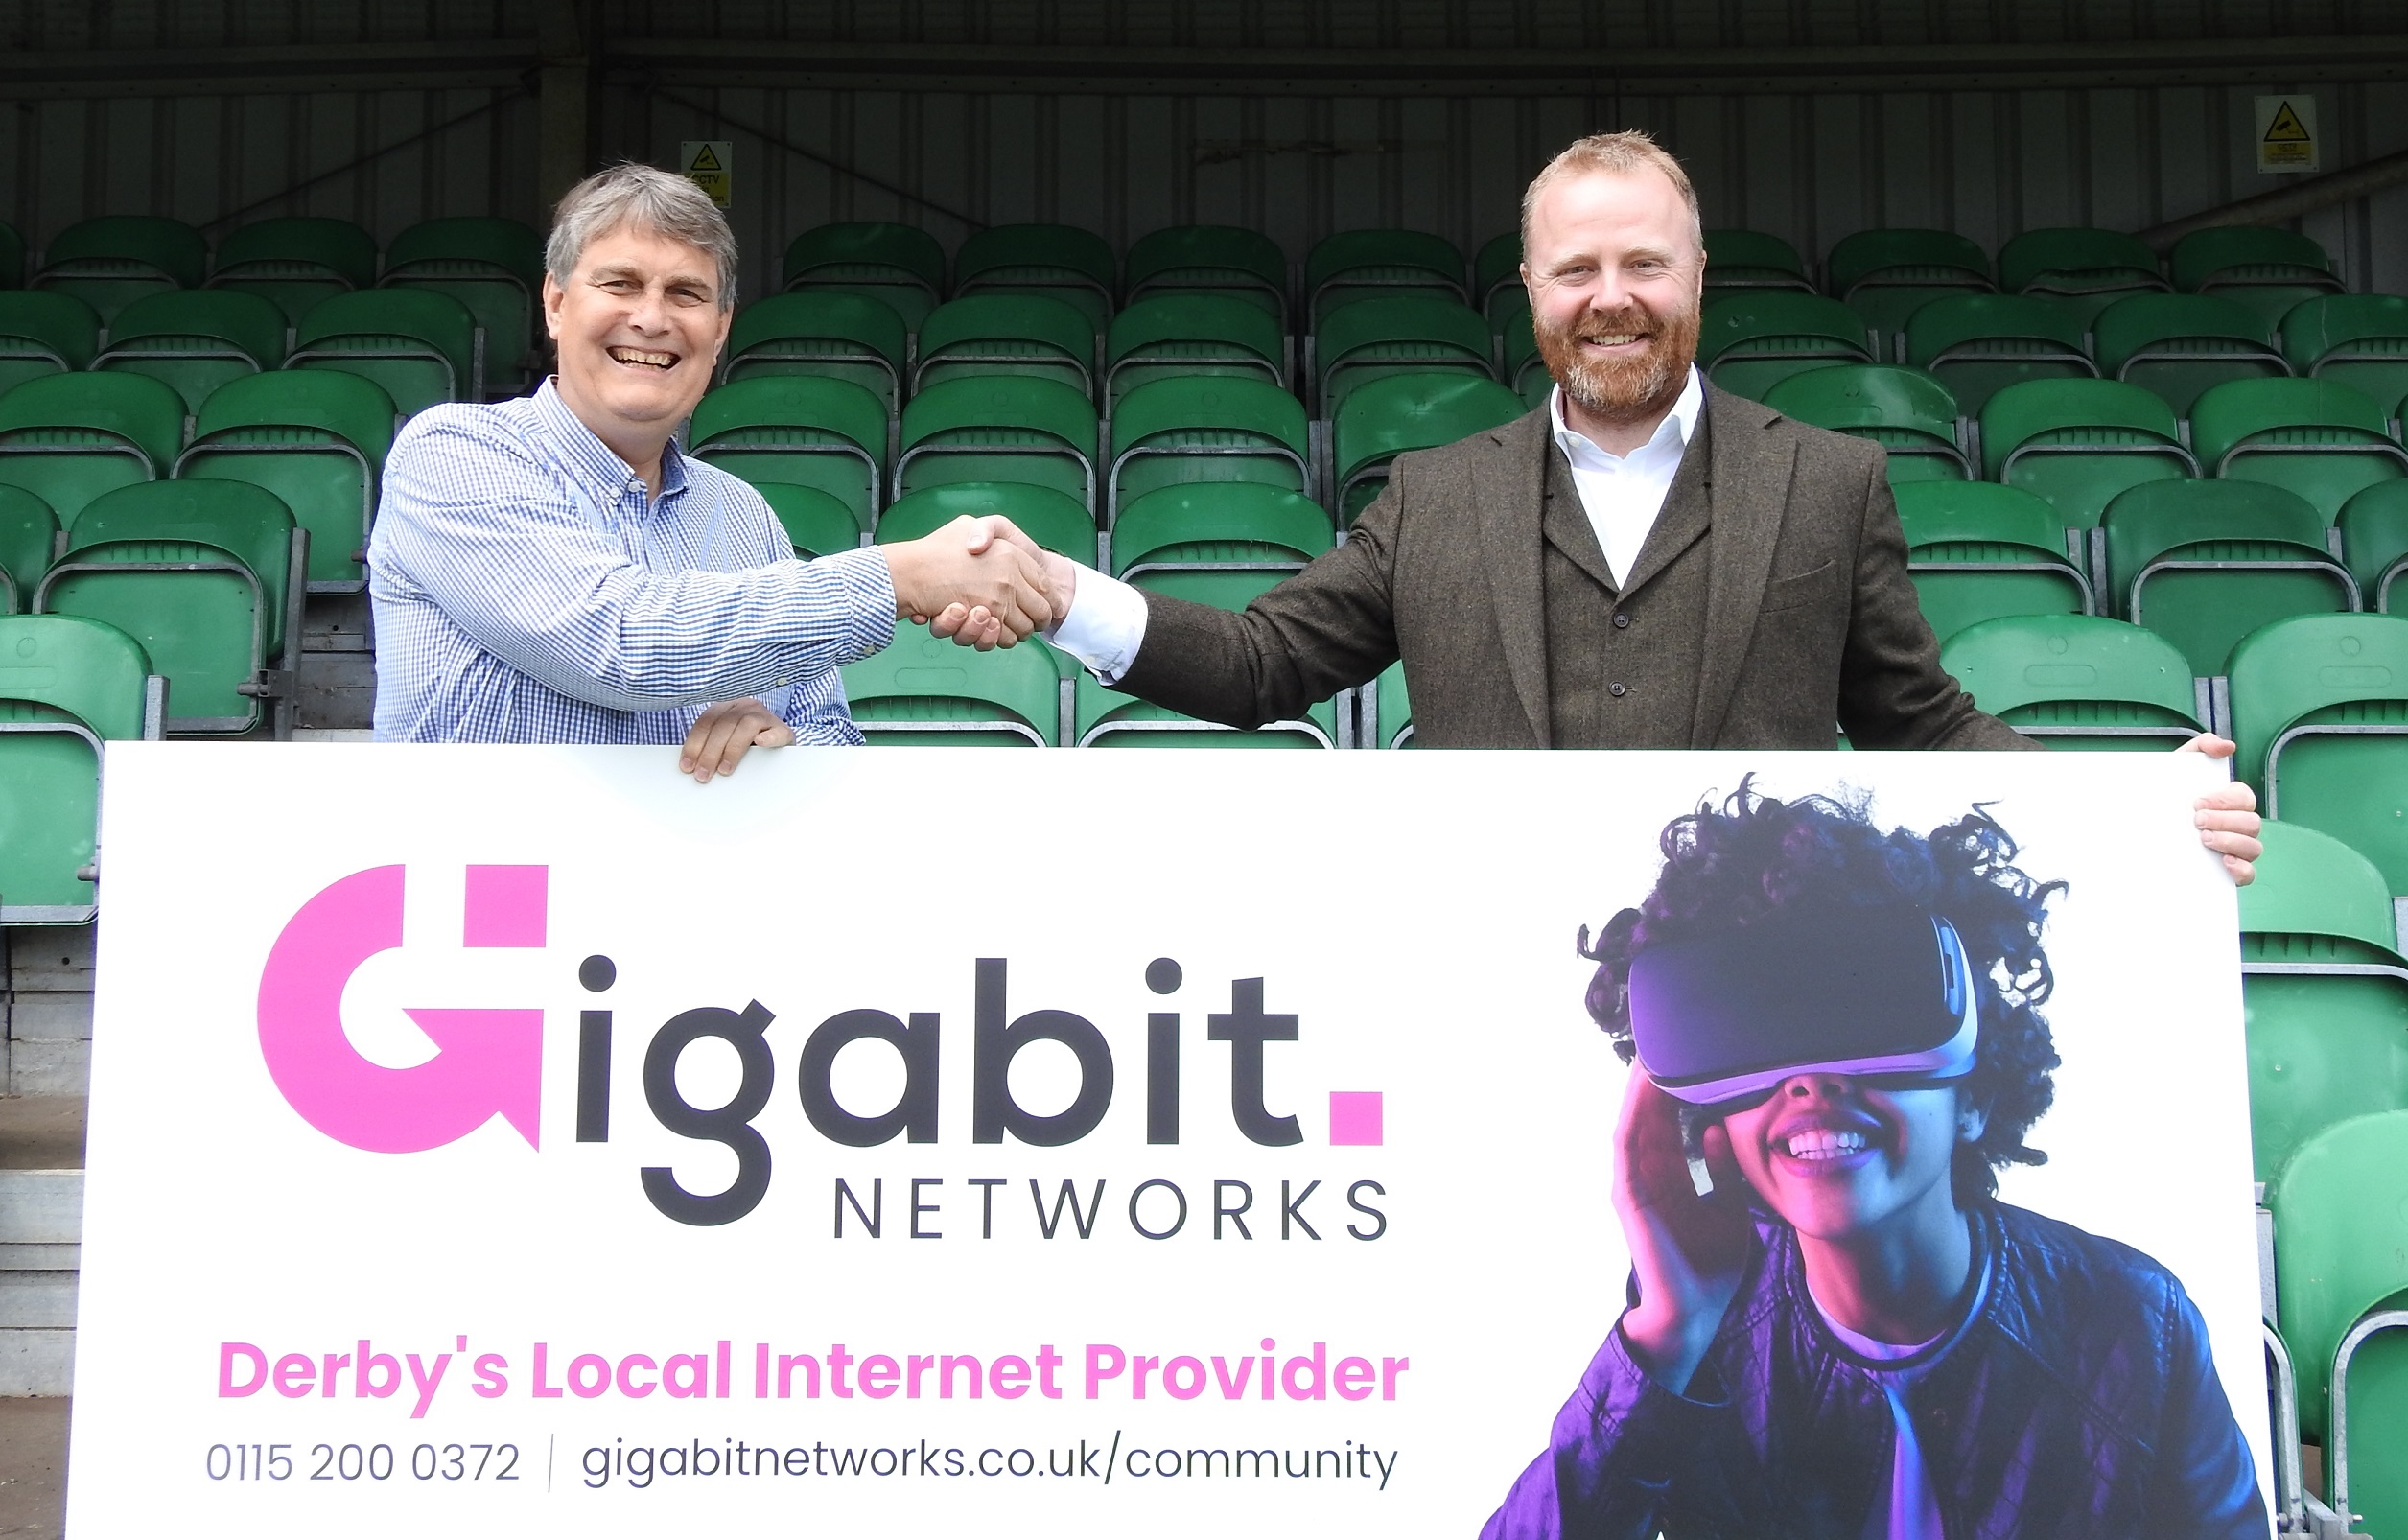 Broadband provider pitches in at rugby club